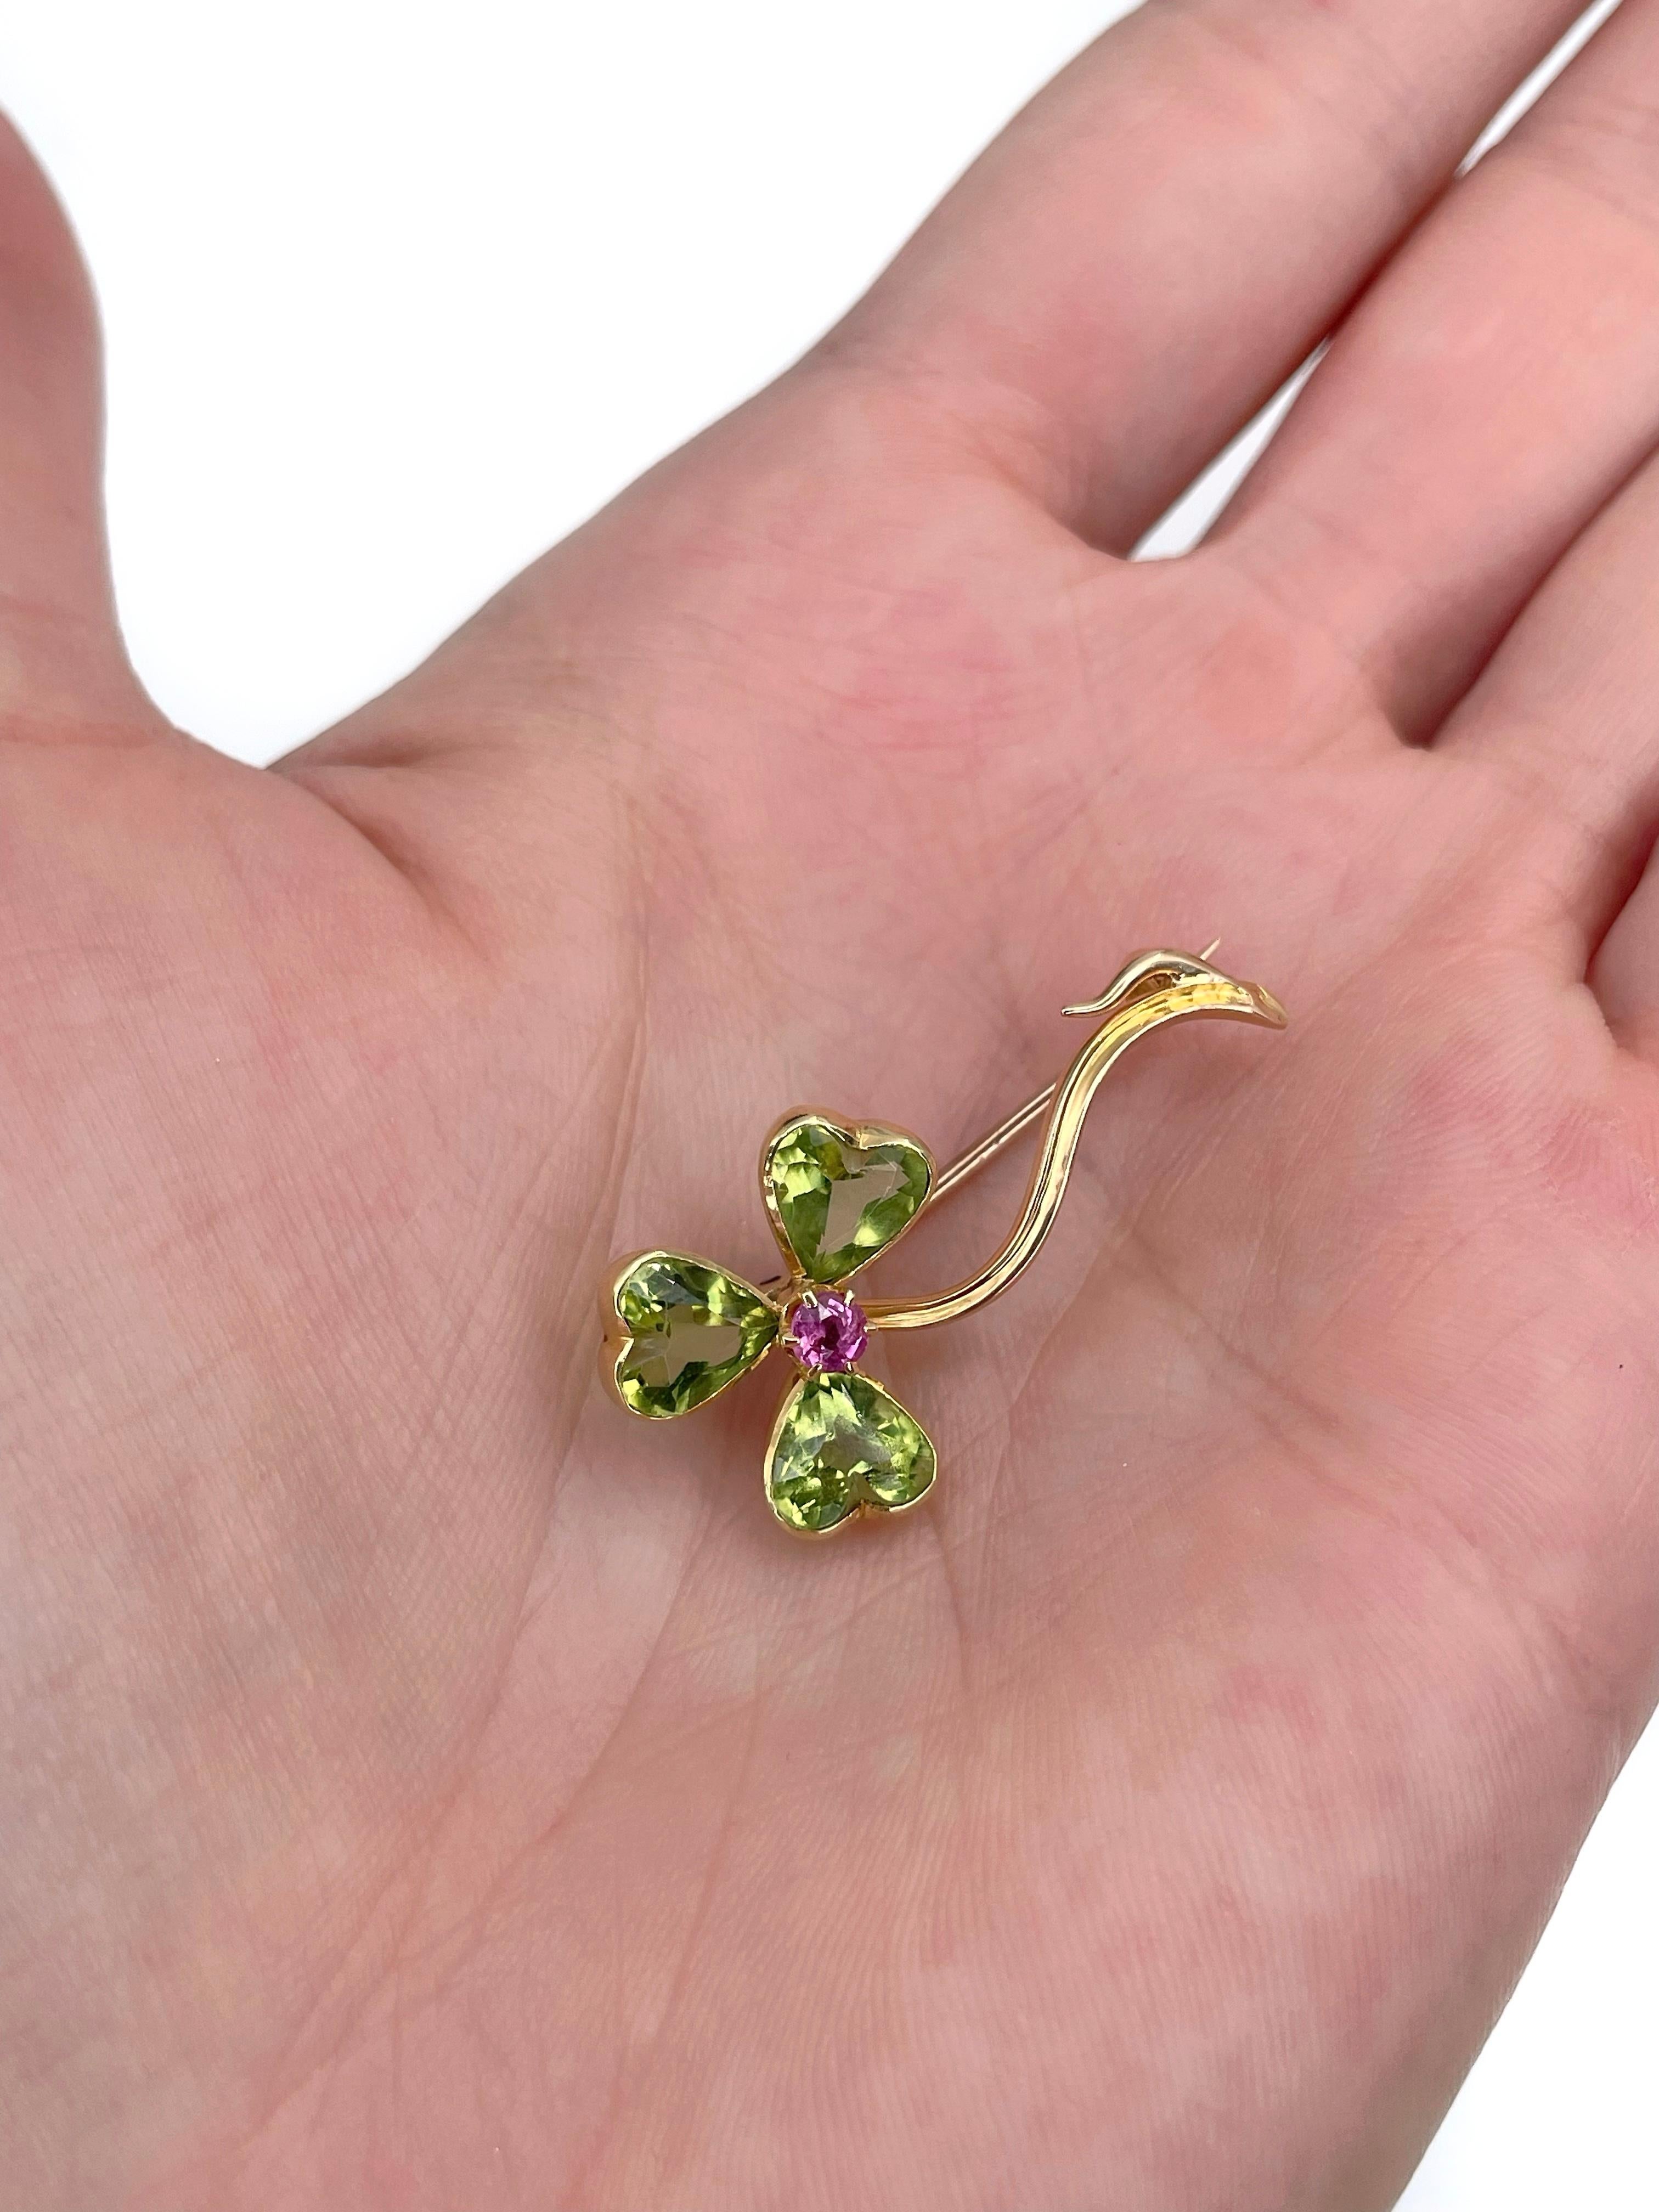 This is a playful Victorian three leaf clover bar brooch crafted in 15K yellow gold. The piece features 3 heart cut peridots and 1 round cut ruby (0.16ct, stpR 4/4, SI). 

Has a C clasp. 

Weight: 3.39g
Size: 3.2x1.5cm

———

If you have any